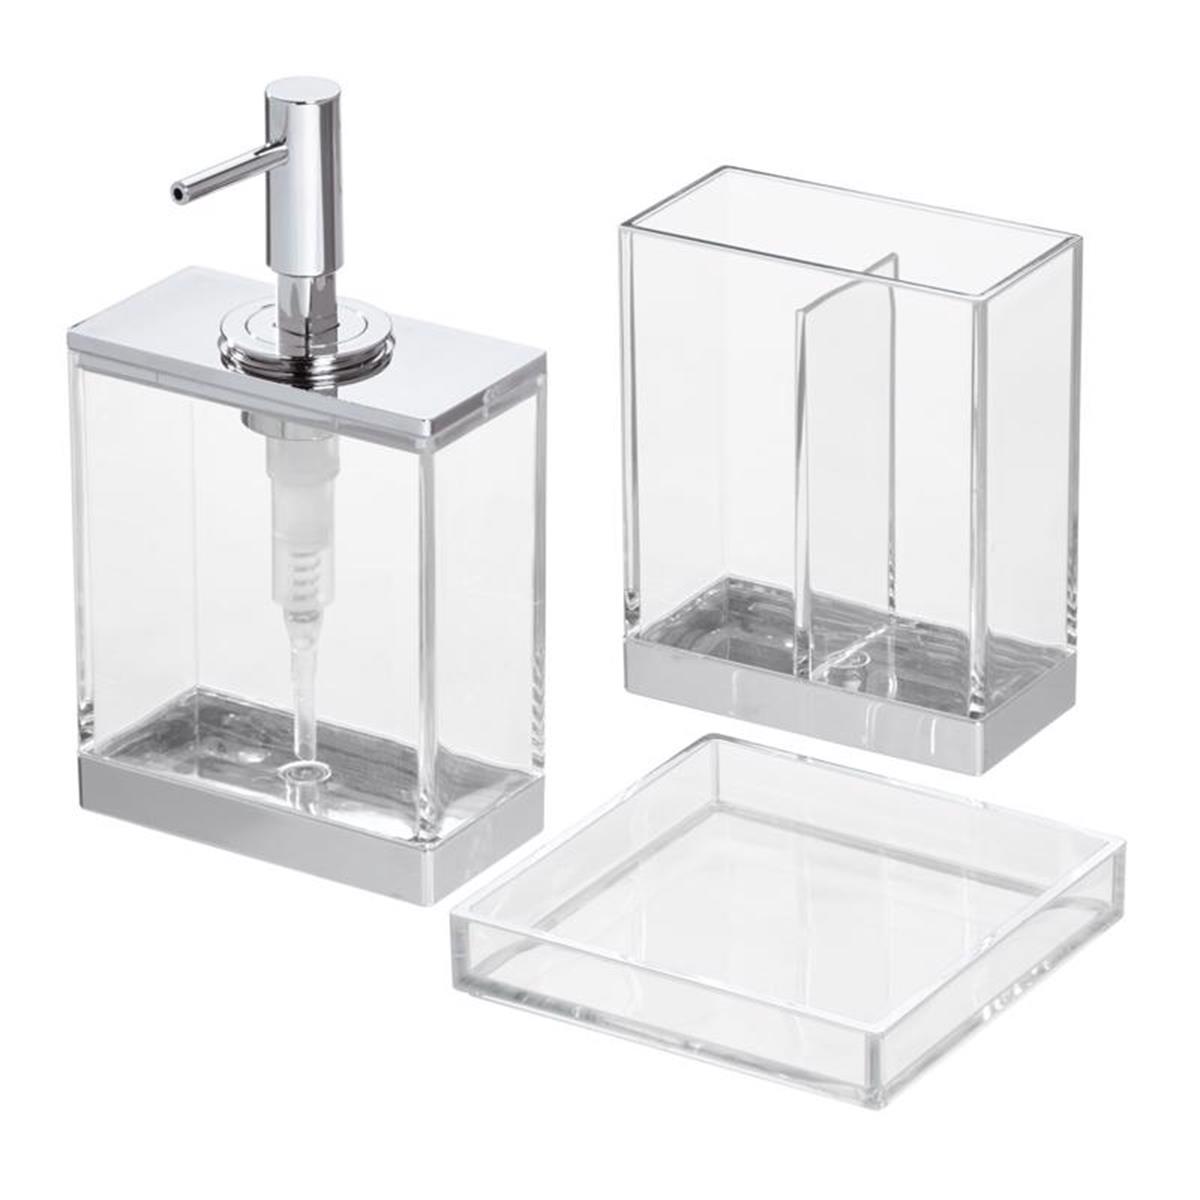 UPC 081492427100 product image for 6054160 InterDesign Clarity Chrome Clear Plastic Bath Accessory Set, Clear | upcitemdb.com